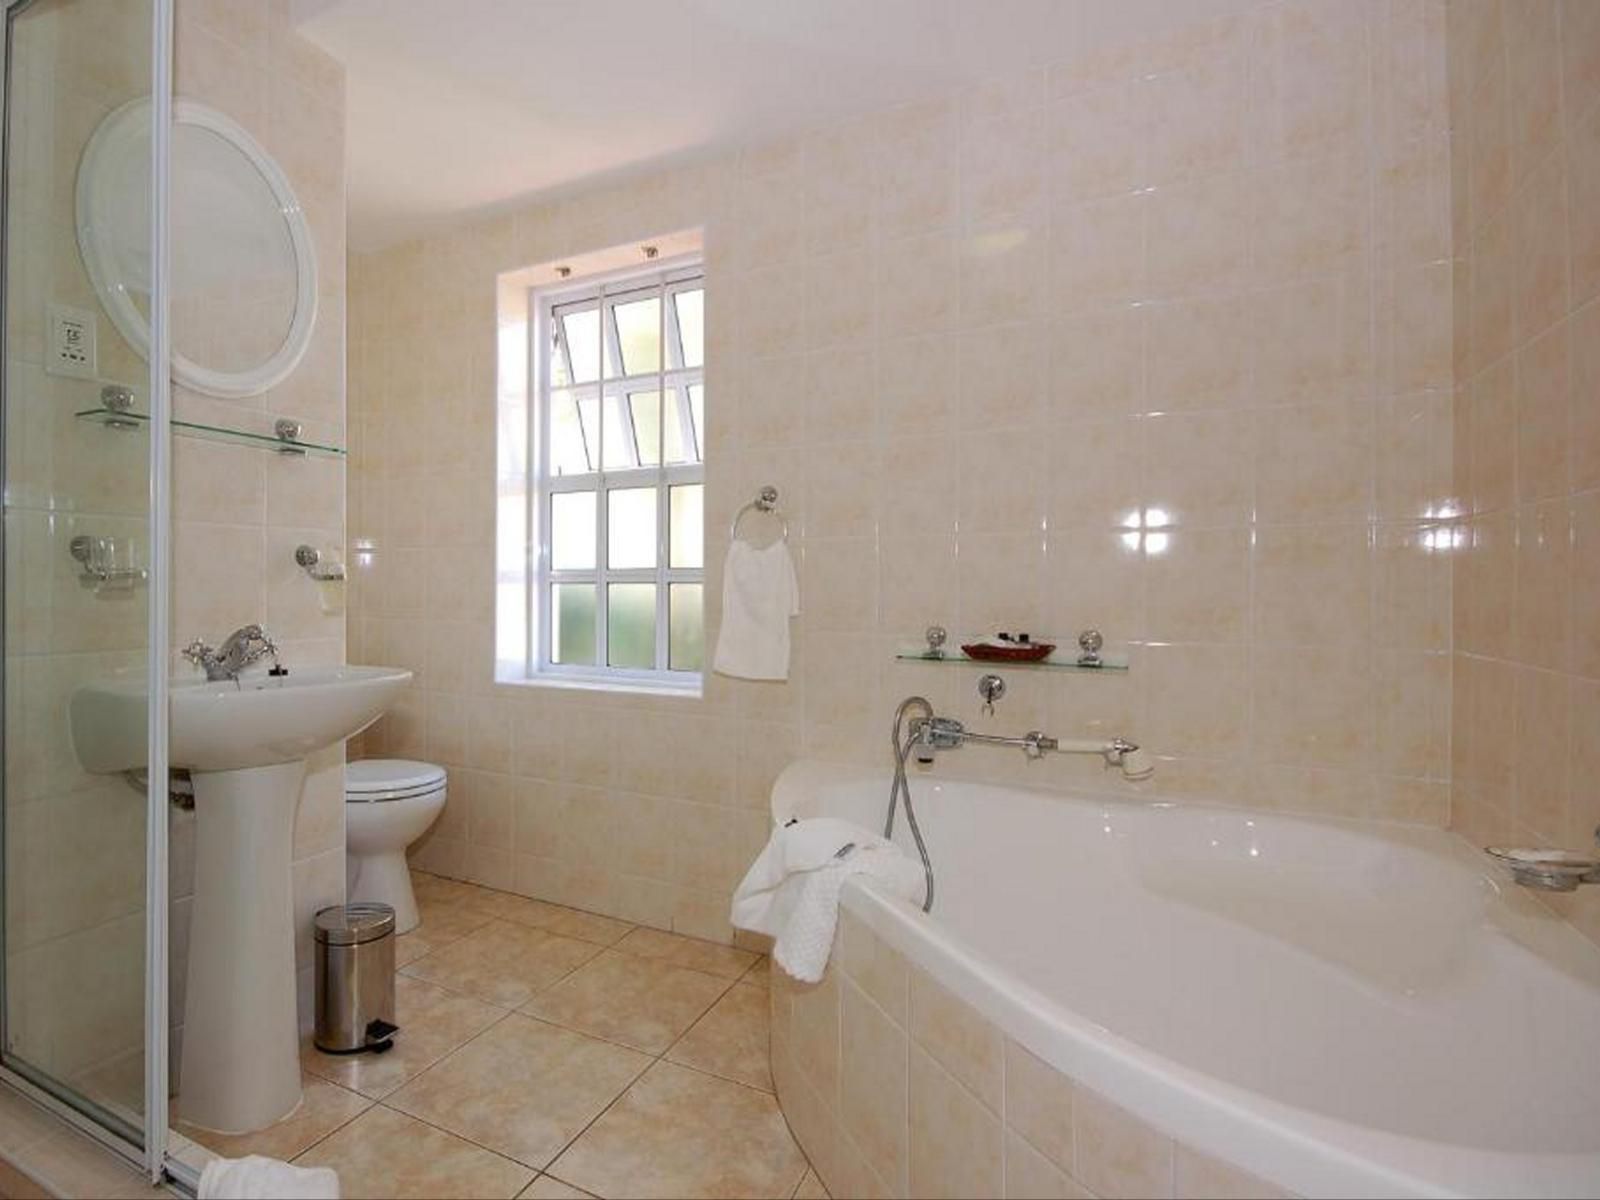 Anchorage Guest House Summerstrand Port Elizabeth Eastern Cape South Africa Unsaturated, Bathroom